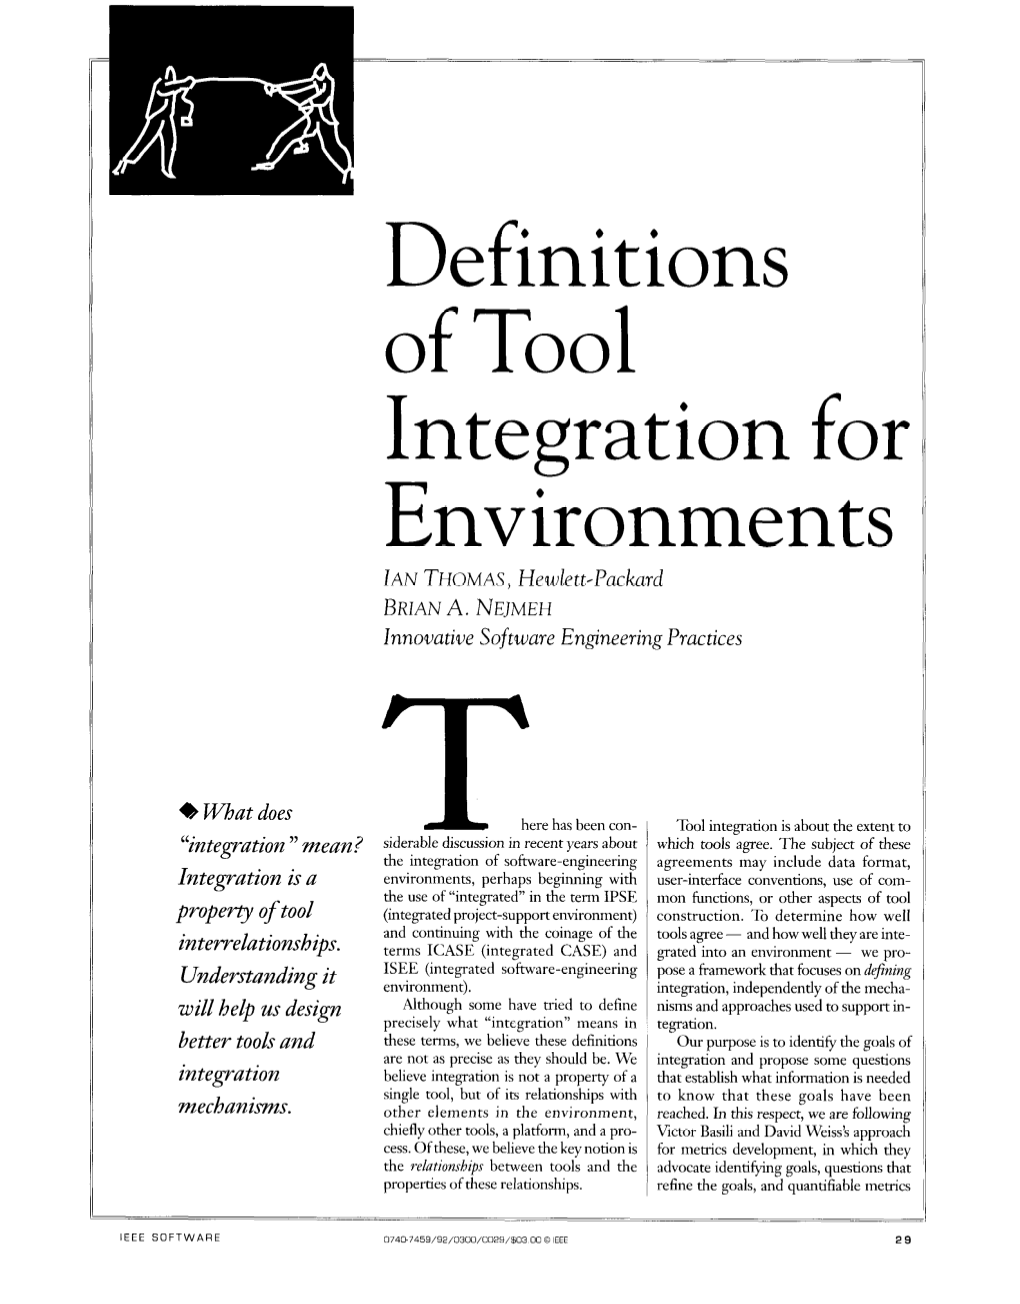 Definitions of Tool Integration for E Nvironments